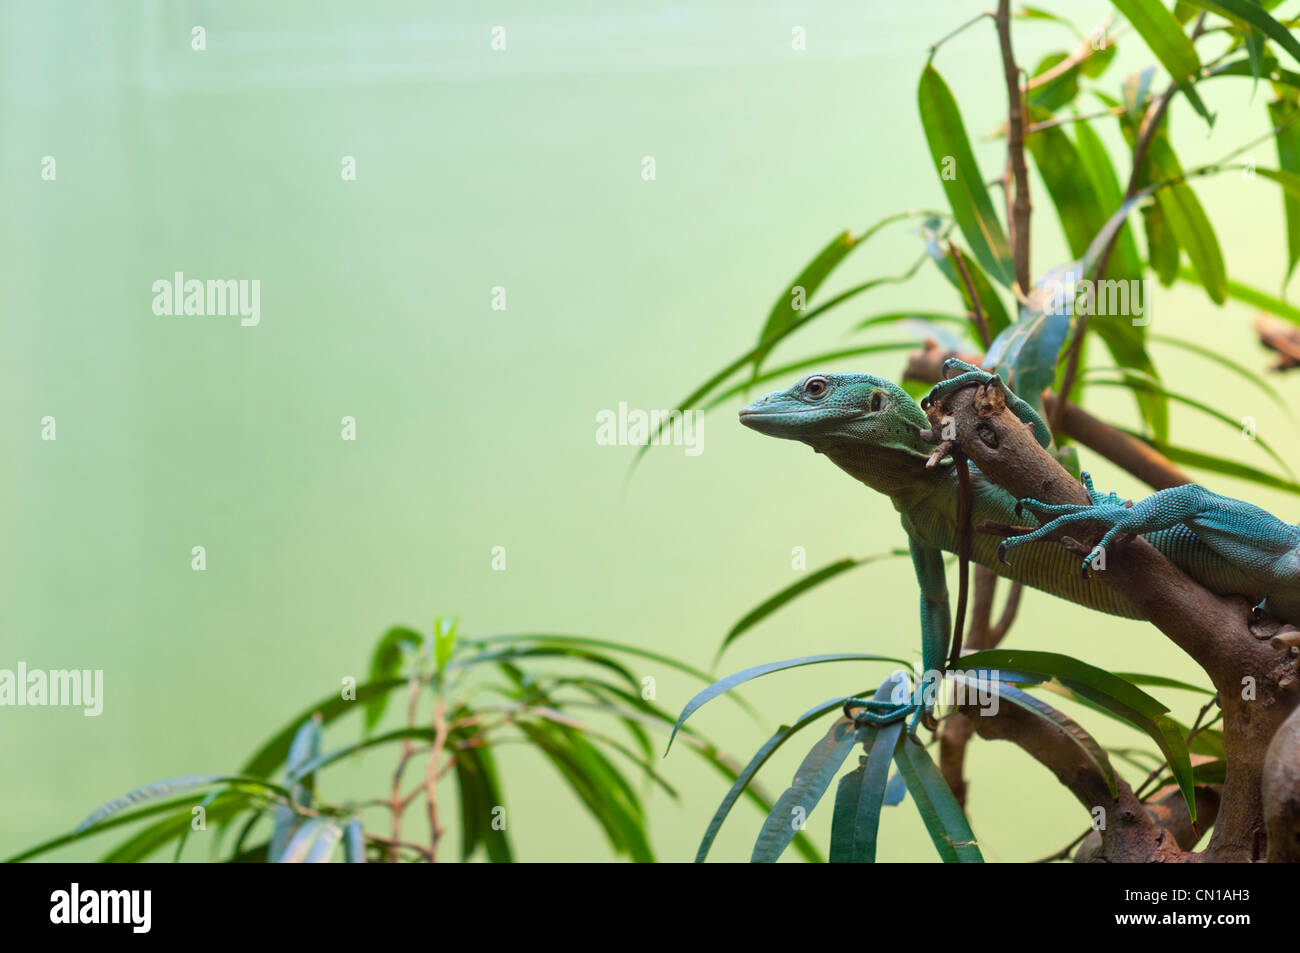 Anolis sp. - Anole stretched out on branch with space for text Stock Photo